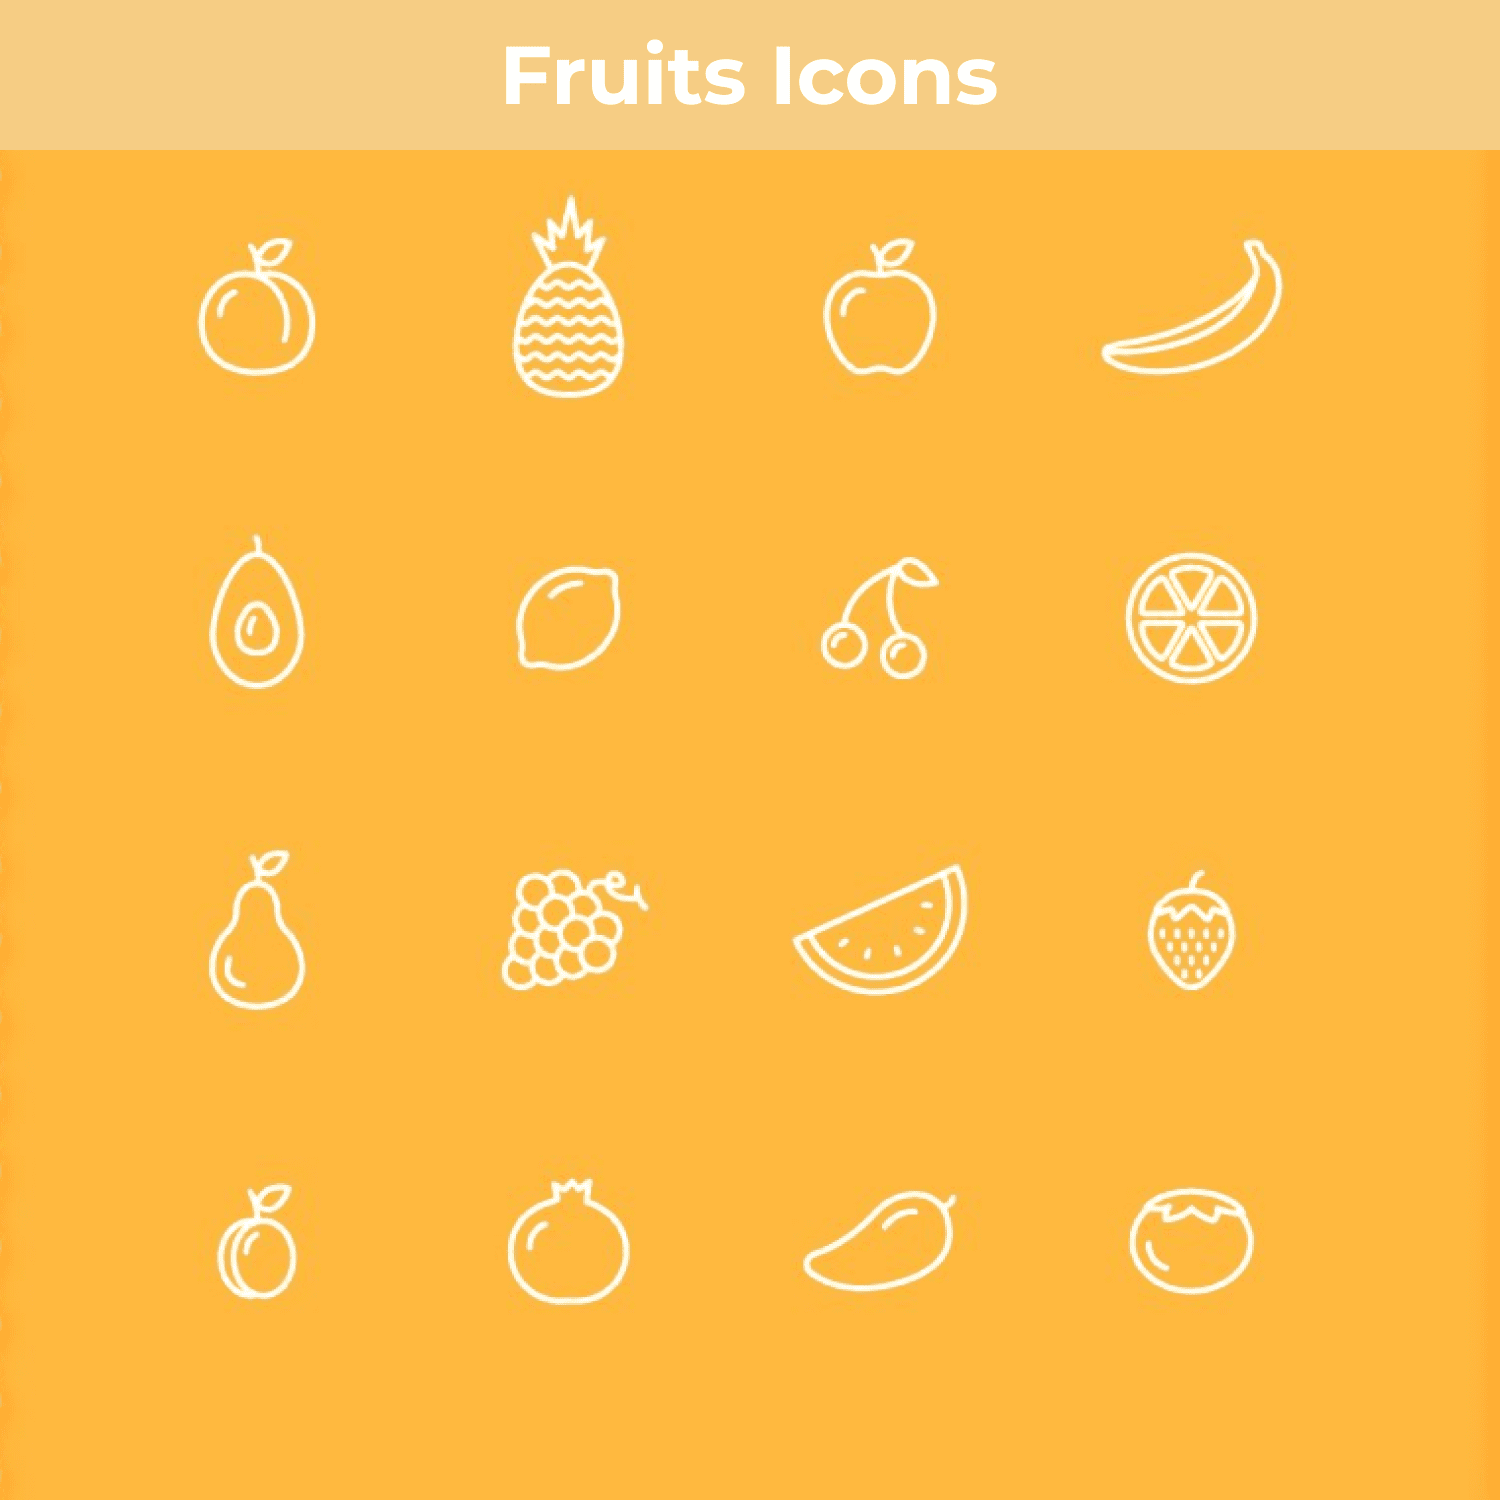 Fruits Icons cover image.